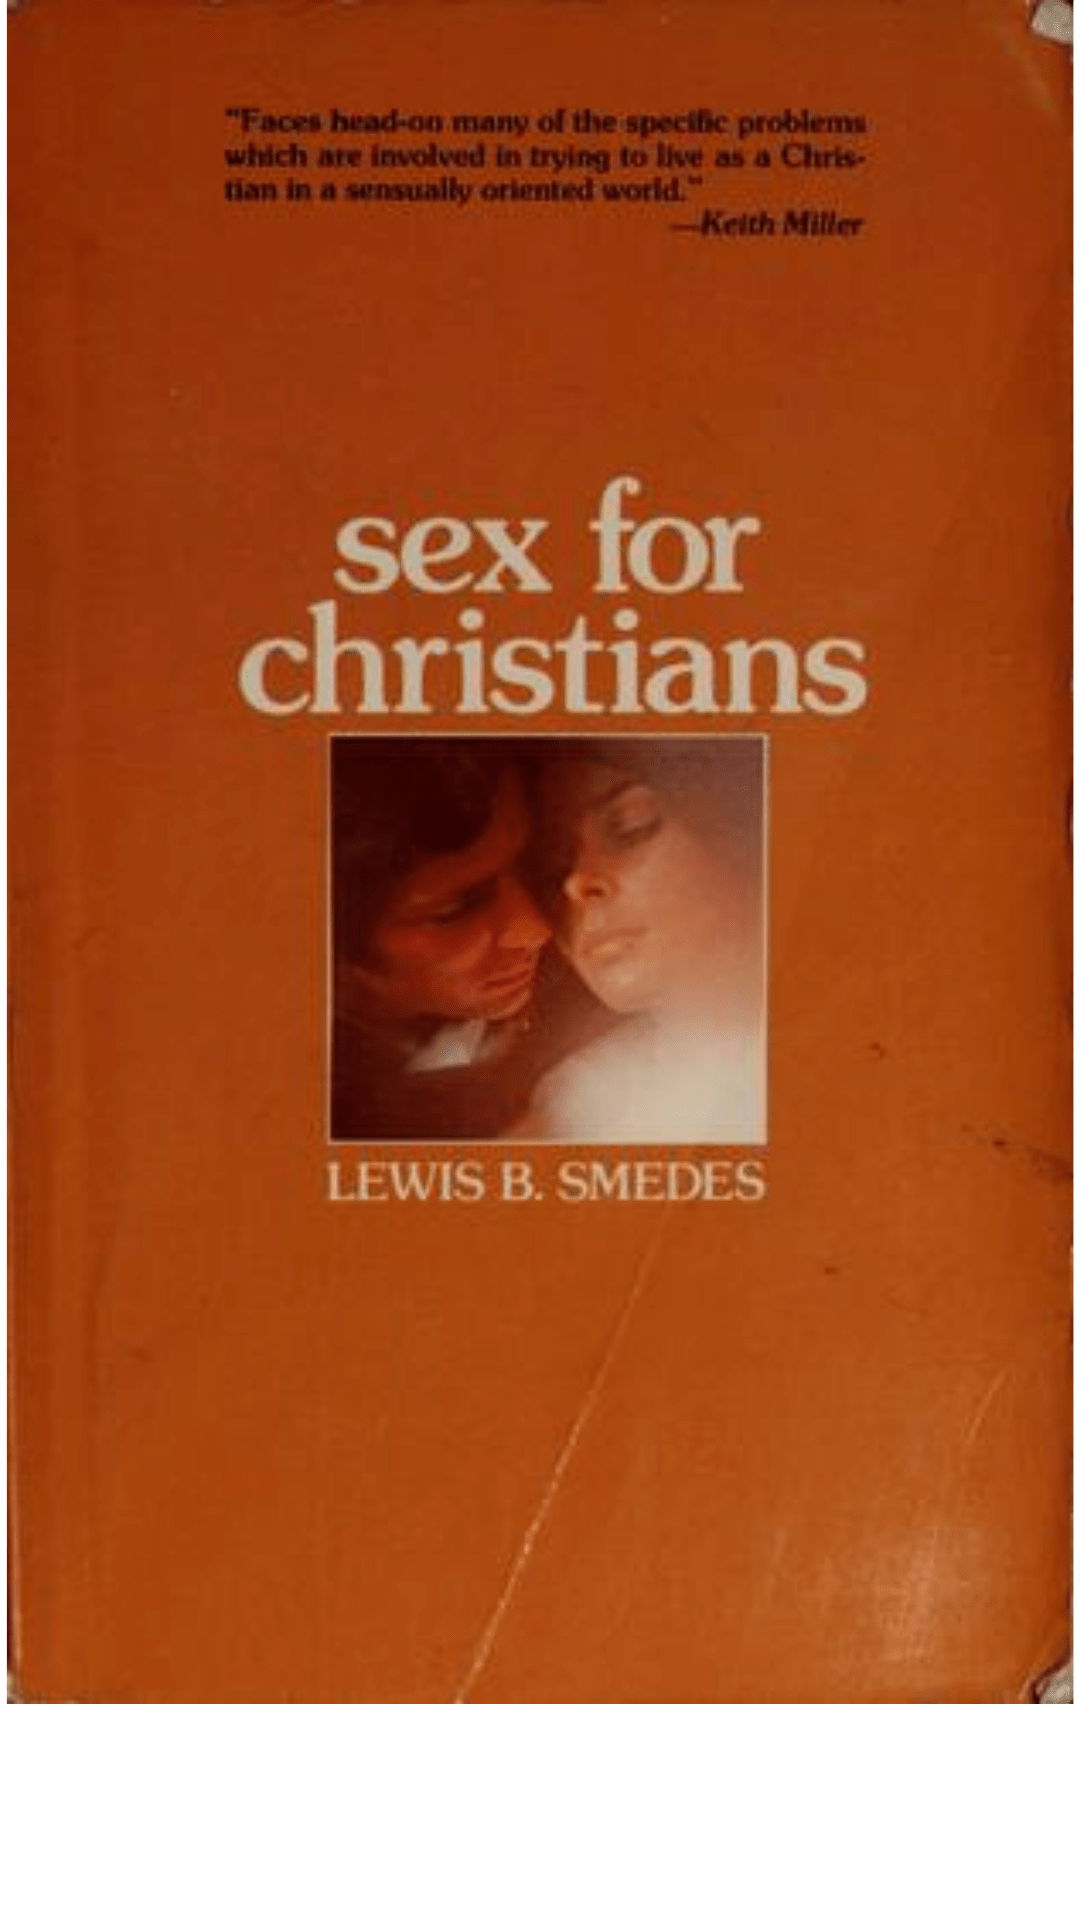 Sex for Christians: The Limits and Liberties of Sexual Living